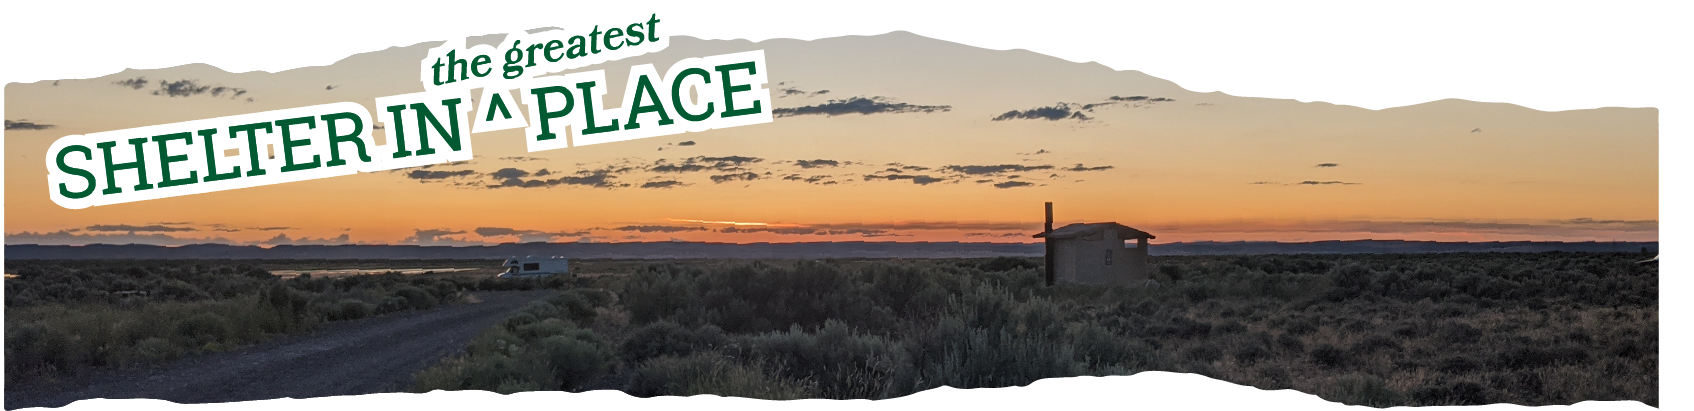 Title Text: Shelter in the Greatest Place laid over a photo of the sun setting over a desert campground with a vault toilet outhouse in the foreground.